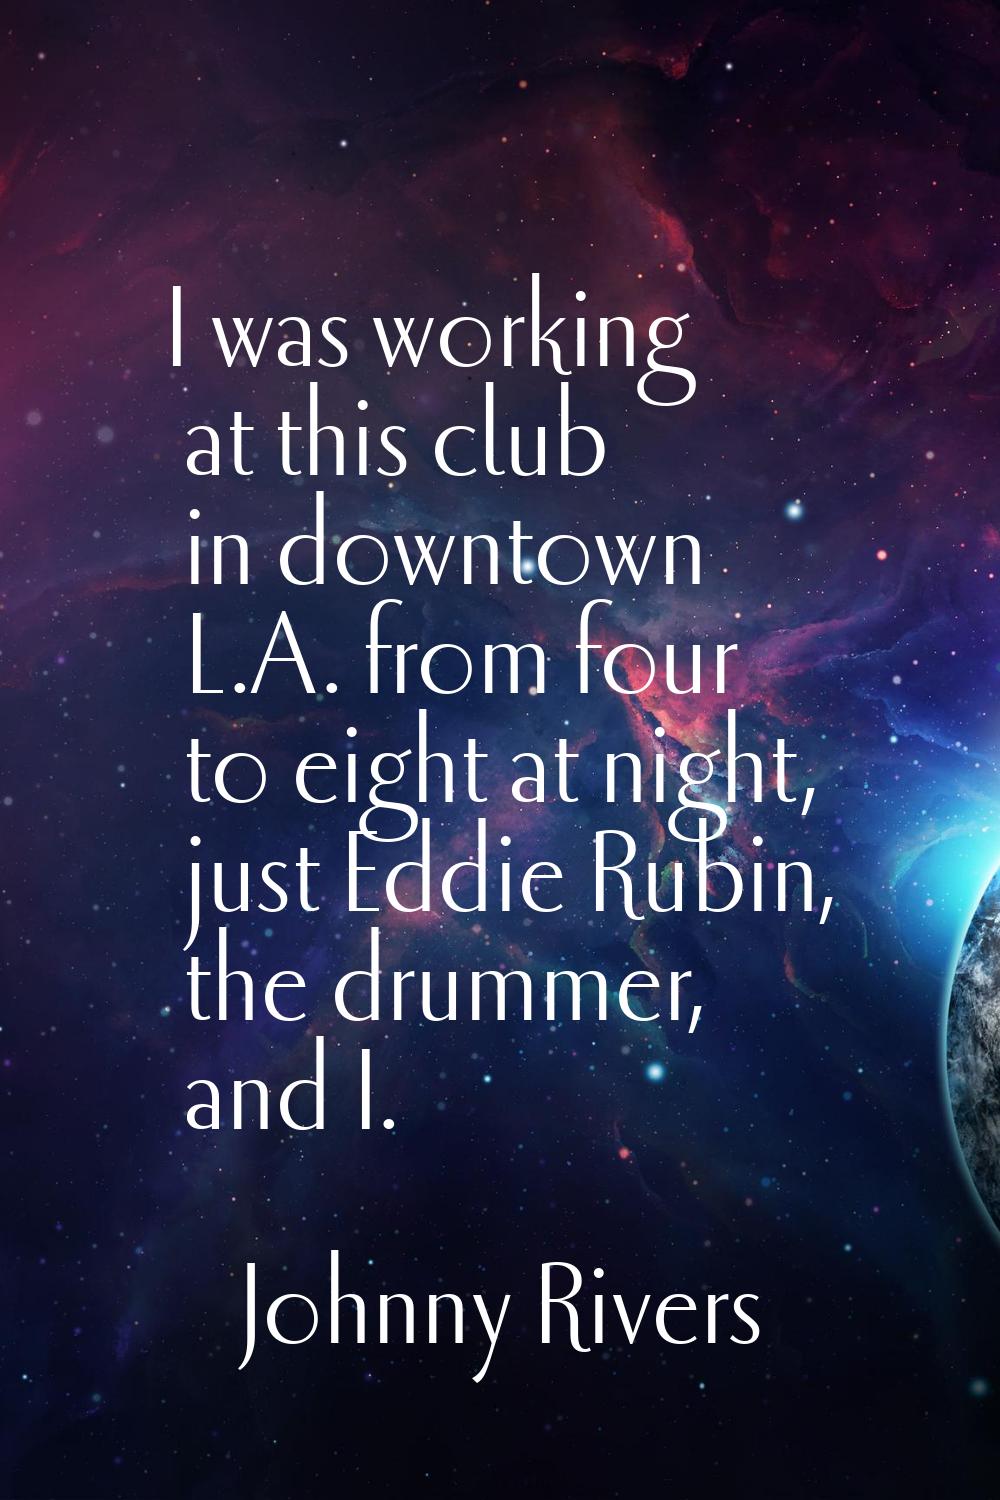 I was working at this club in downtown L.A. from four to eight at night, just Eddie Rubin, the drum